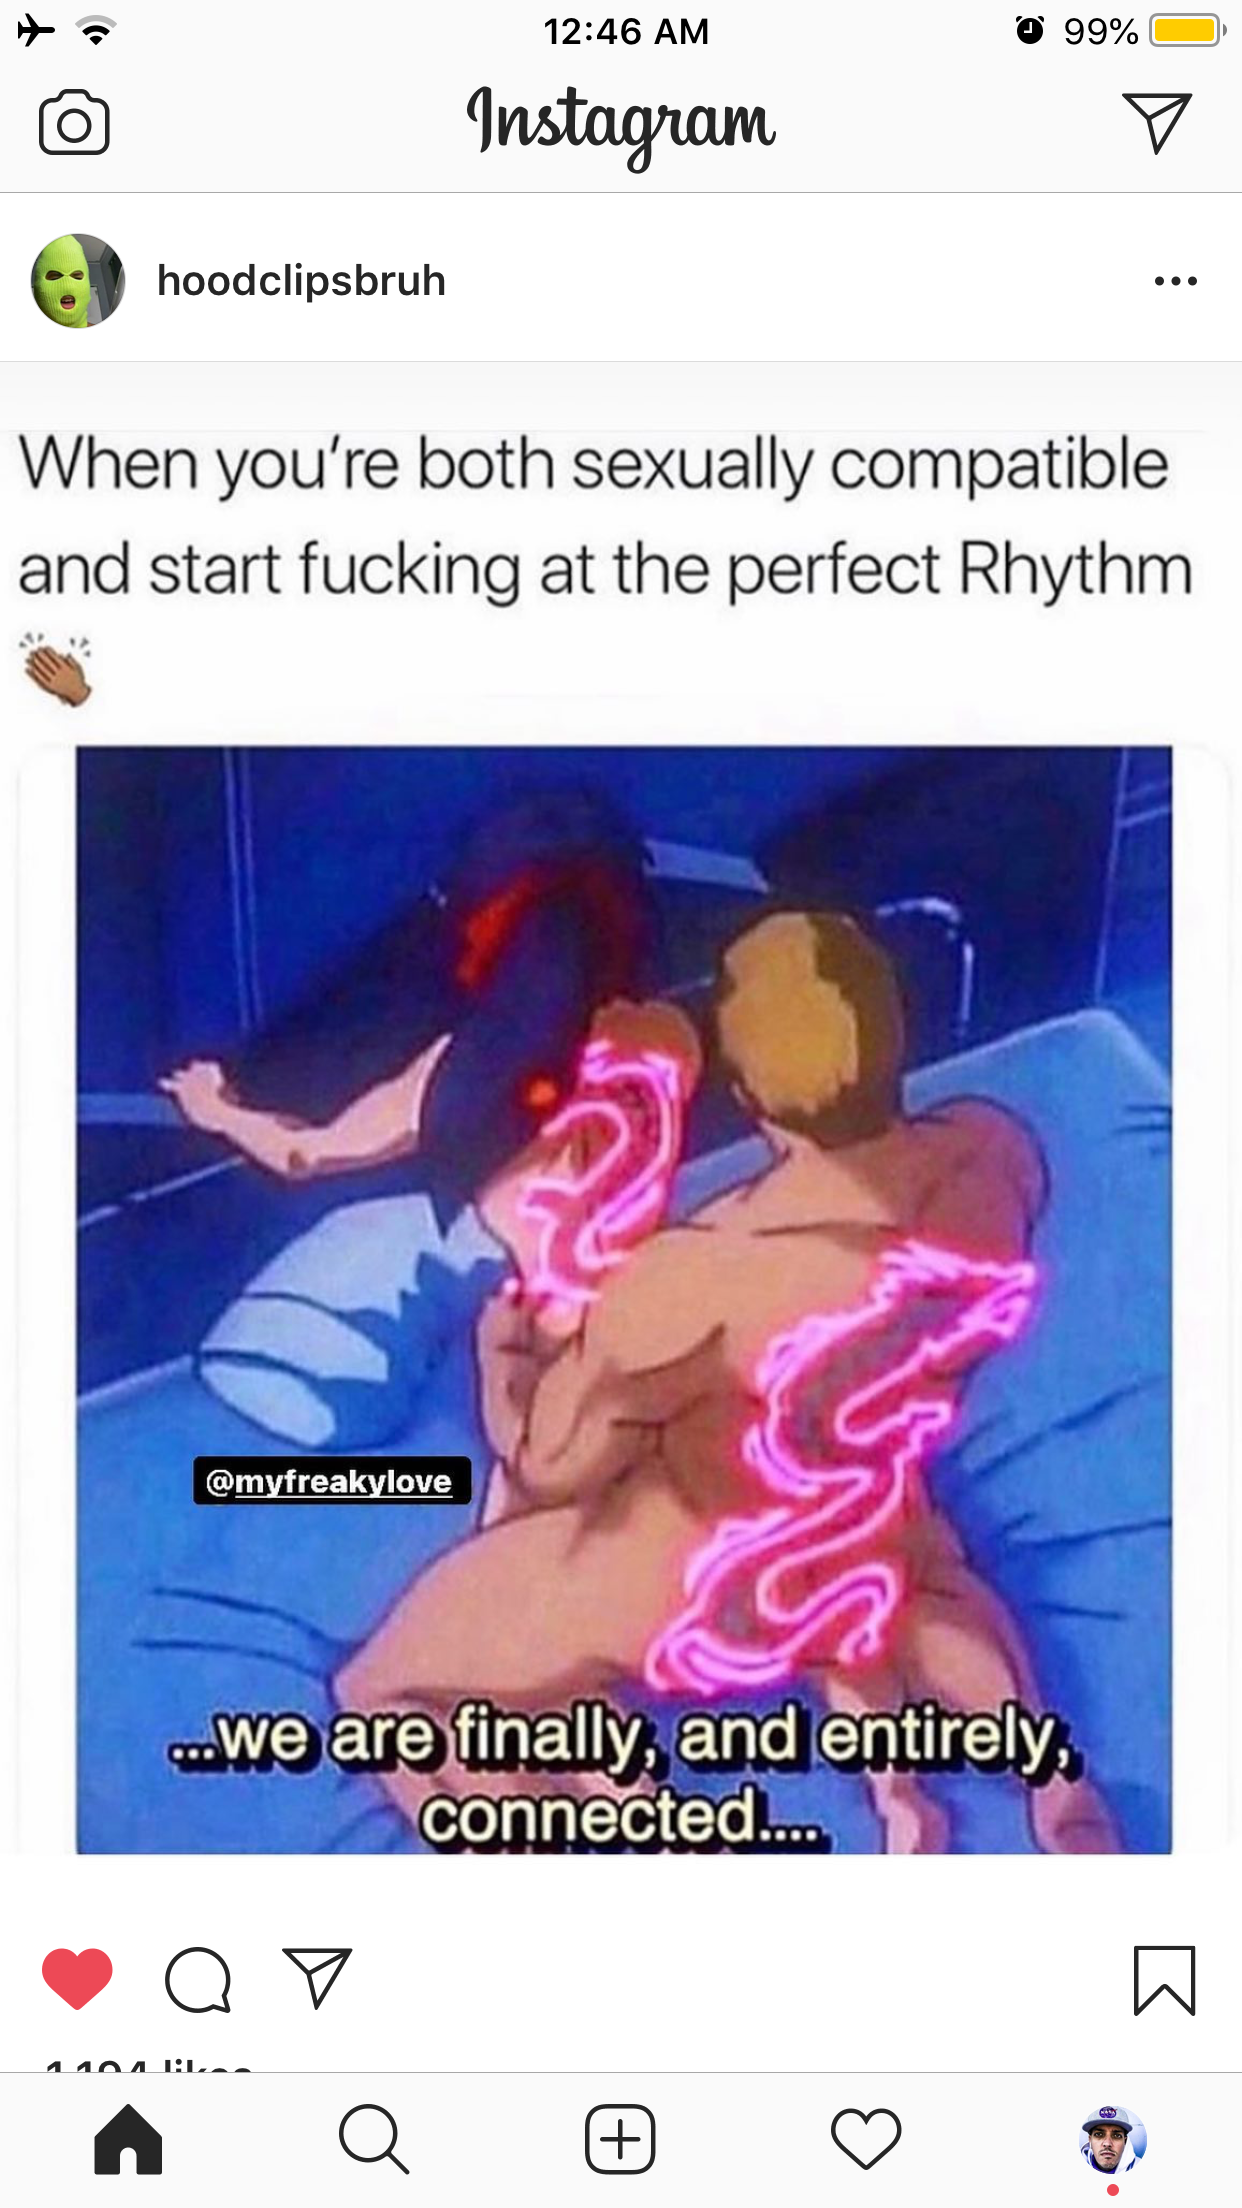 cartoon - 99% Instagram hoodclipsbruh When you're both sexually compatible and start fucking at the perfect Rhythm Smyfreakylowe G ..We are finally, and entirely, connected.... w Ana Q